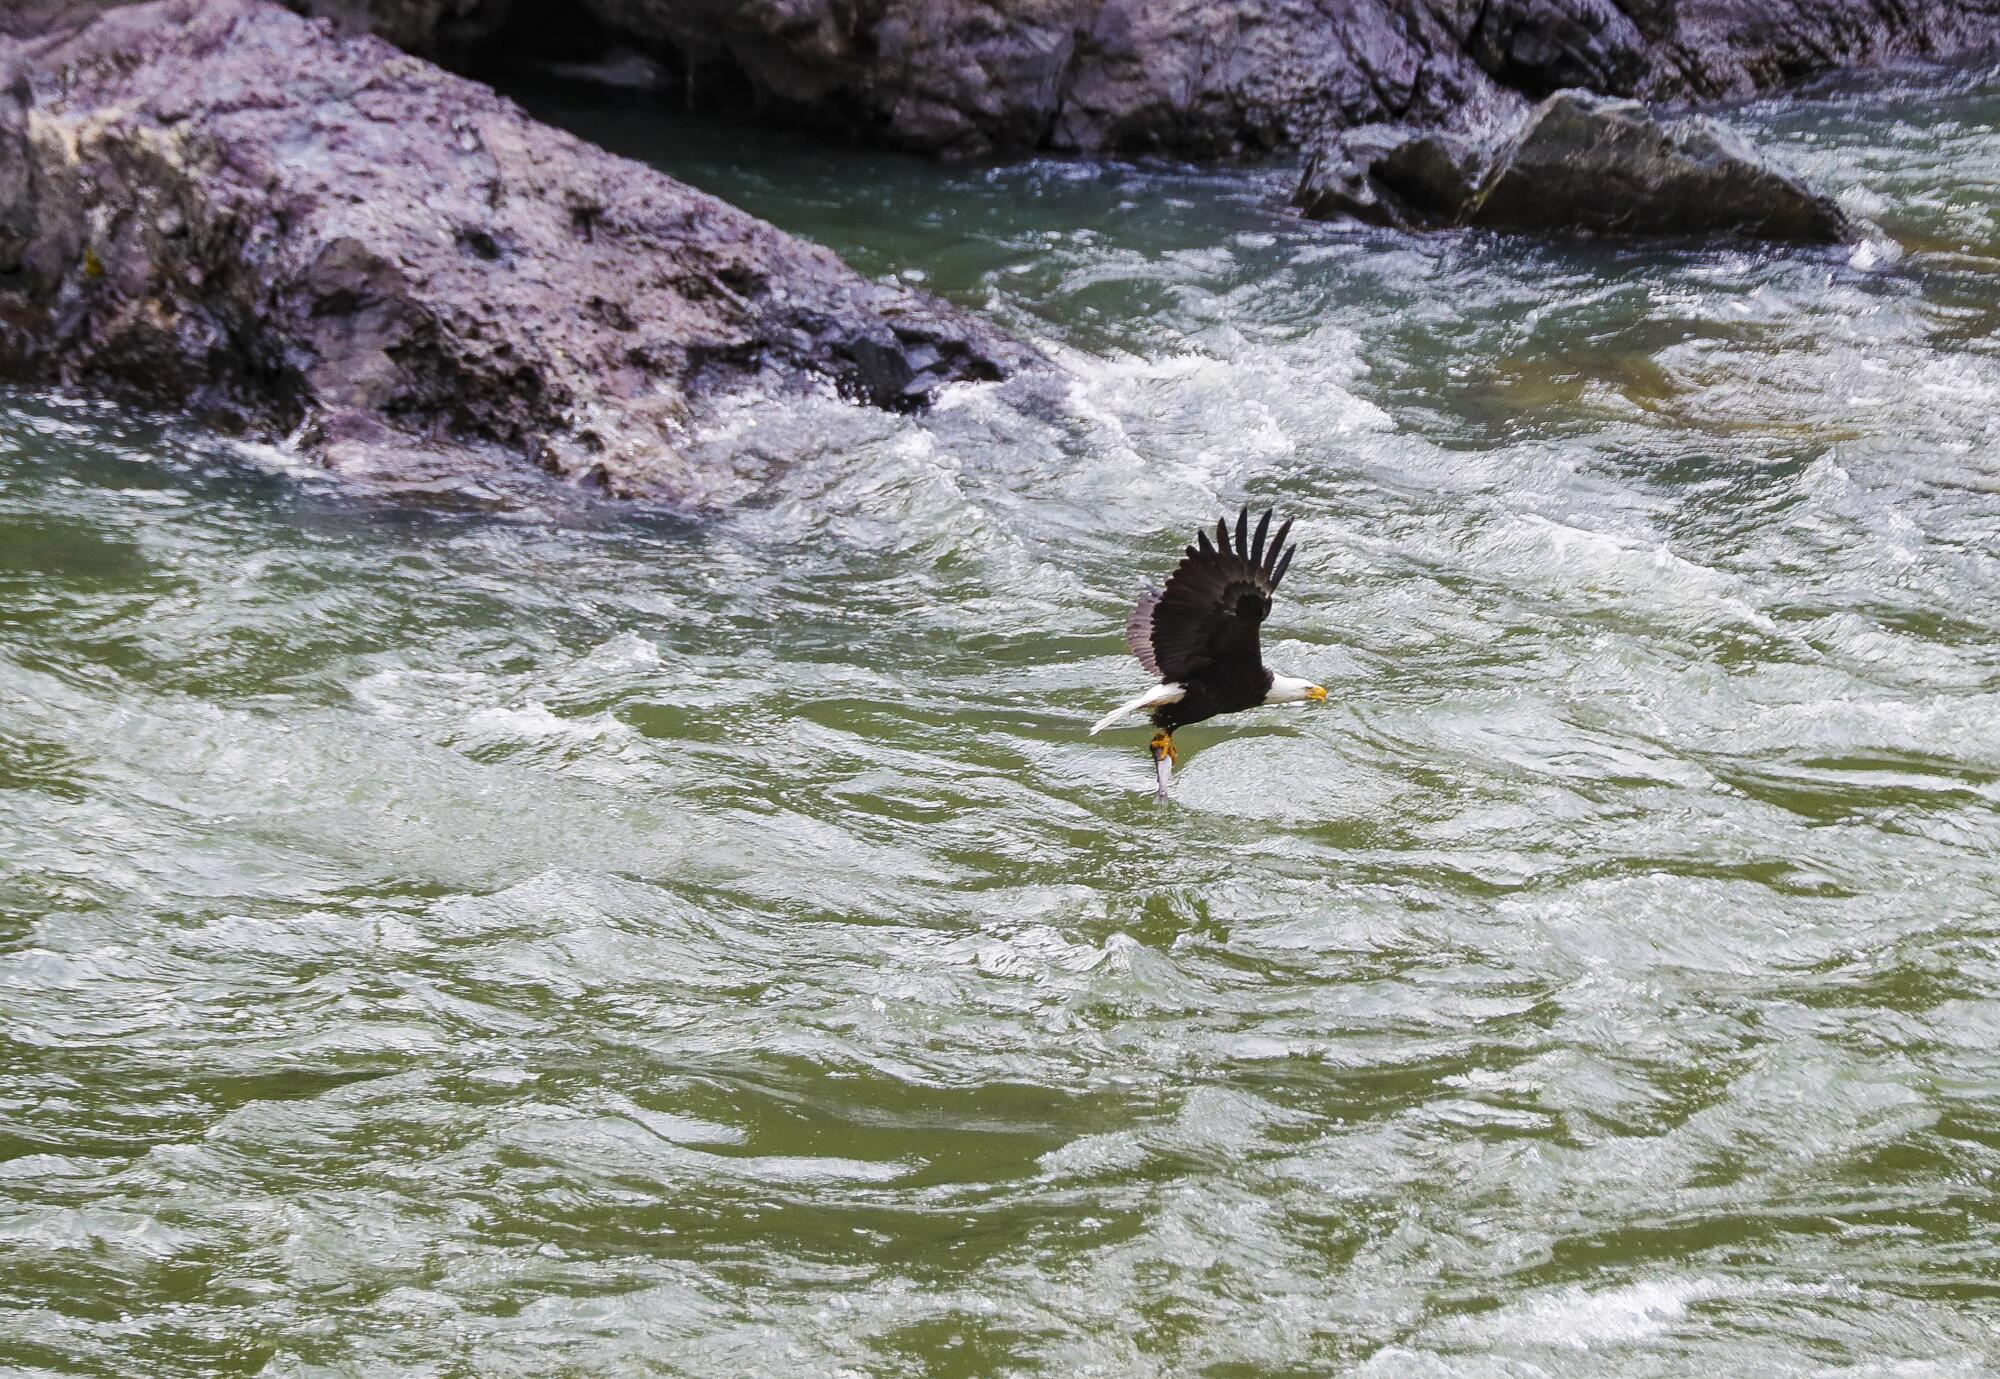 A bald eagle makes off with a fish in its talons as it soars through Hells Canyon on the Snake River.